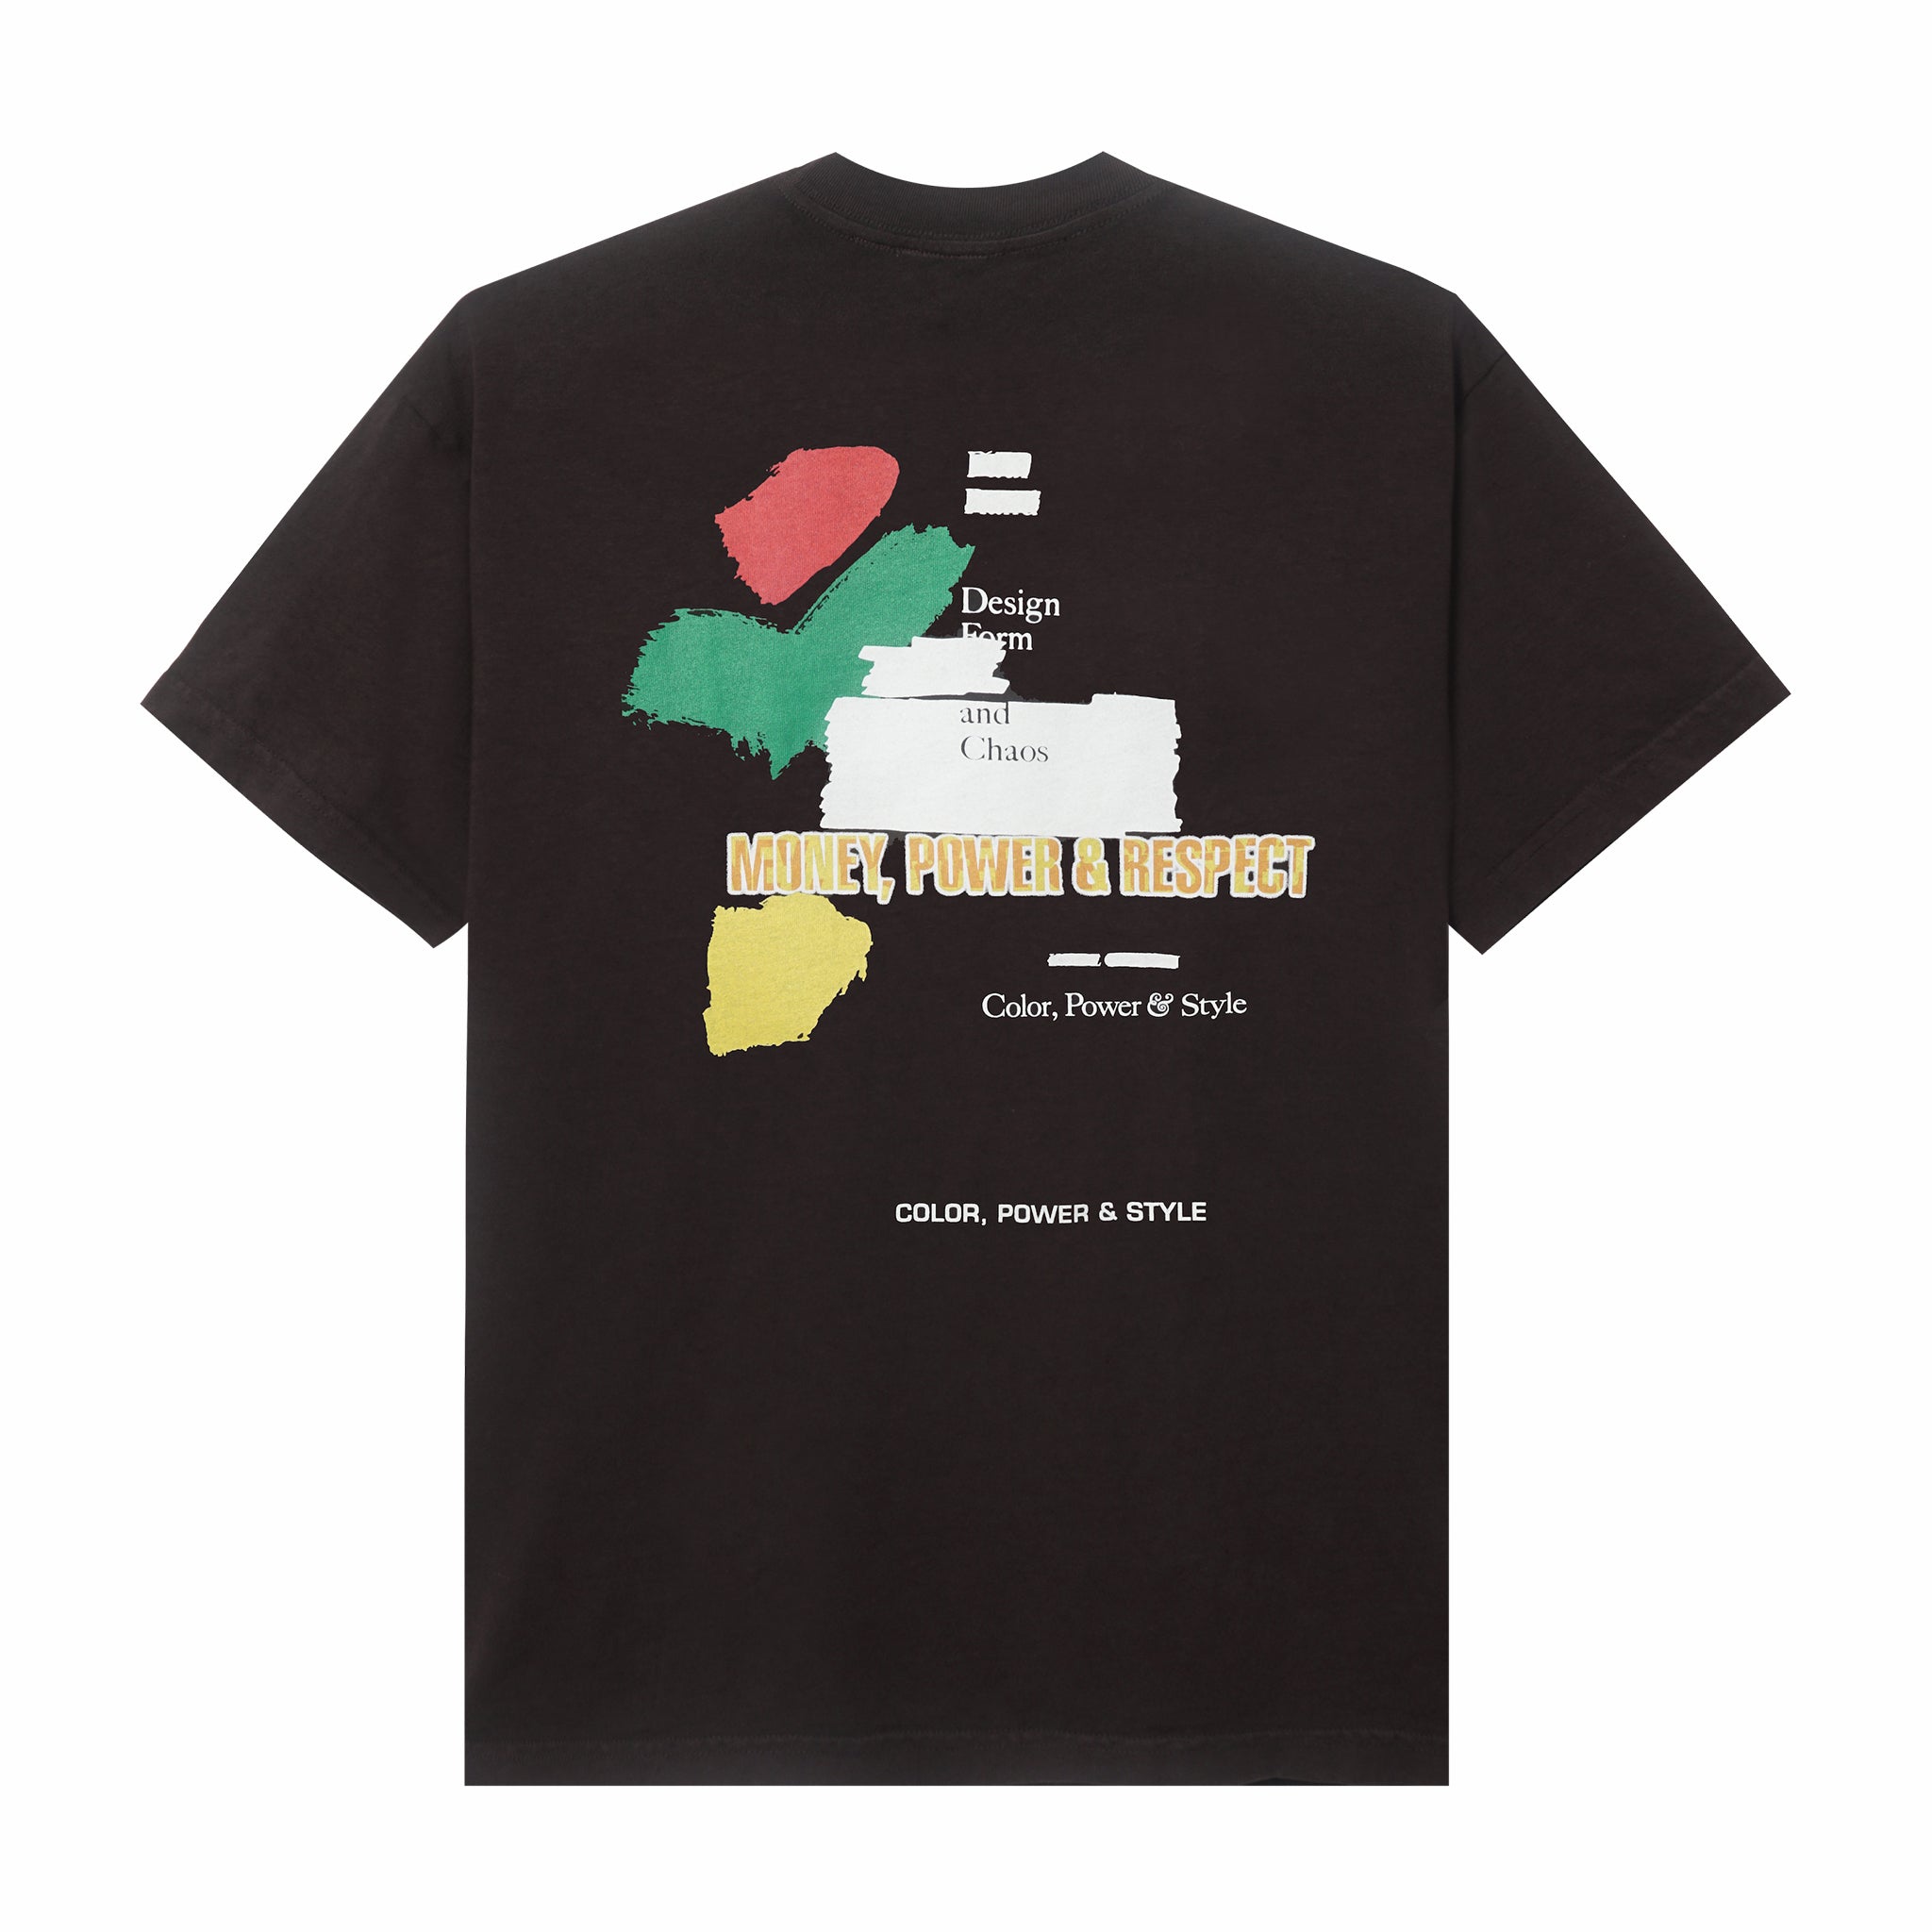 Powers Supply Money Power Respect Tee (Chocolate) - August Shop